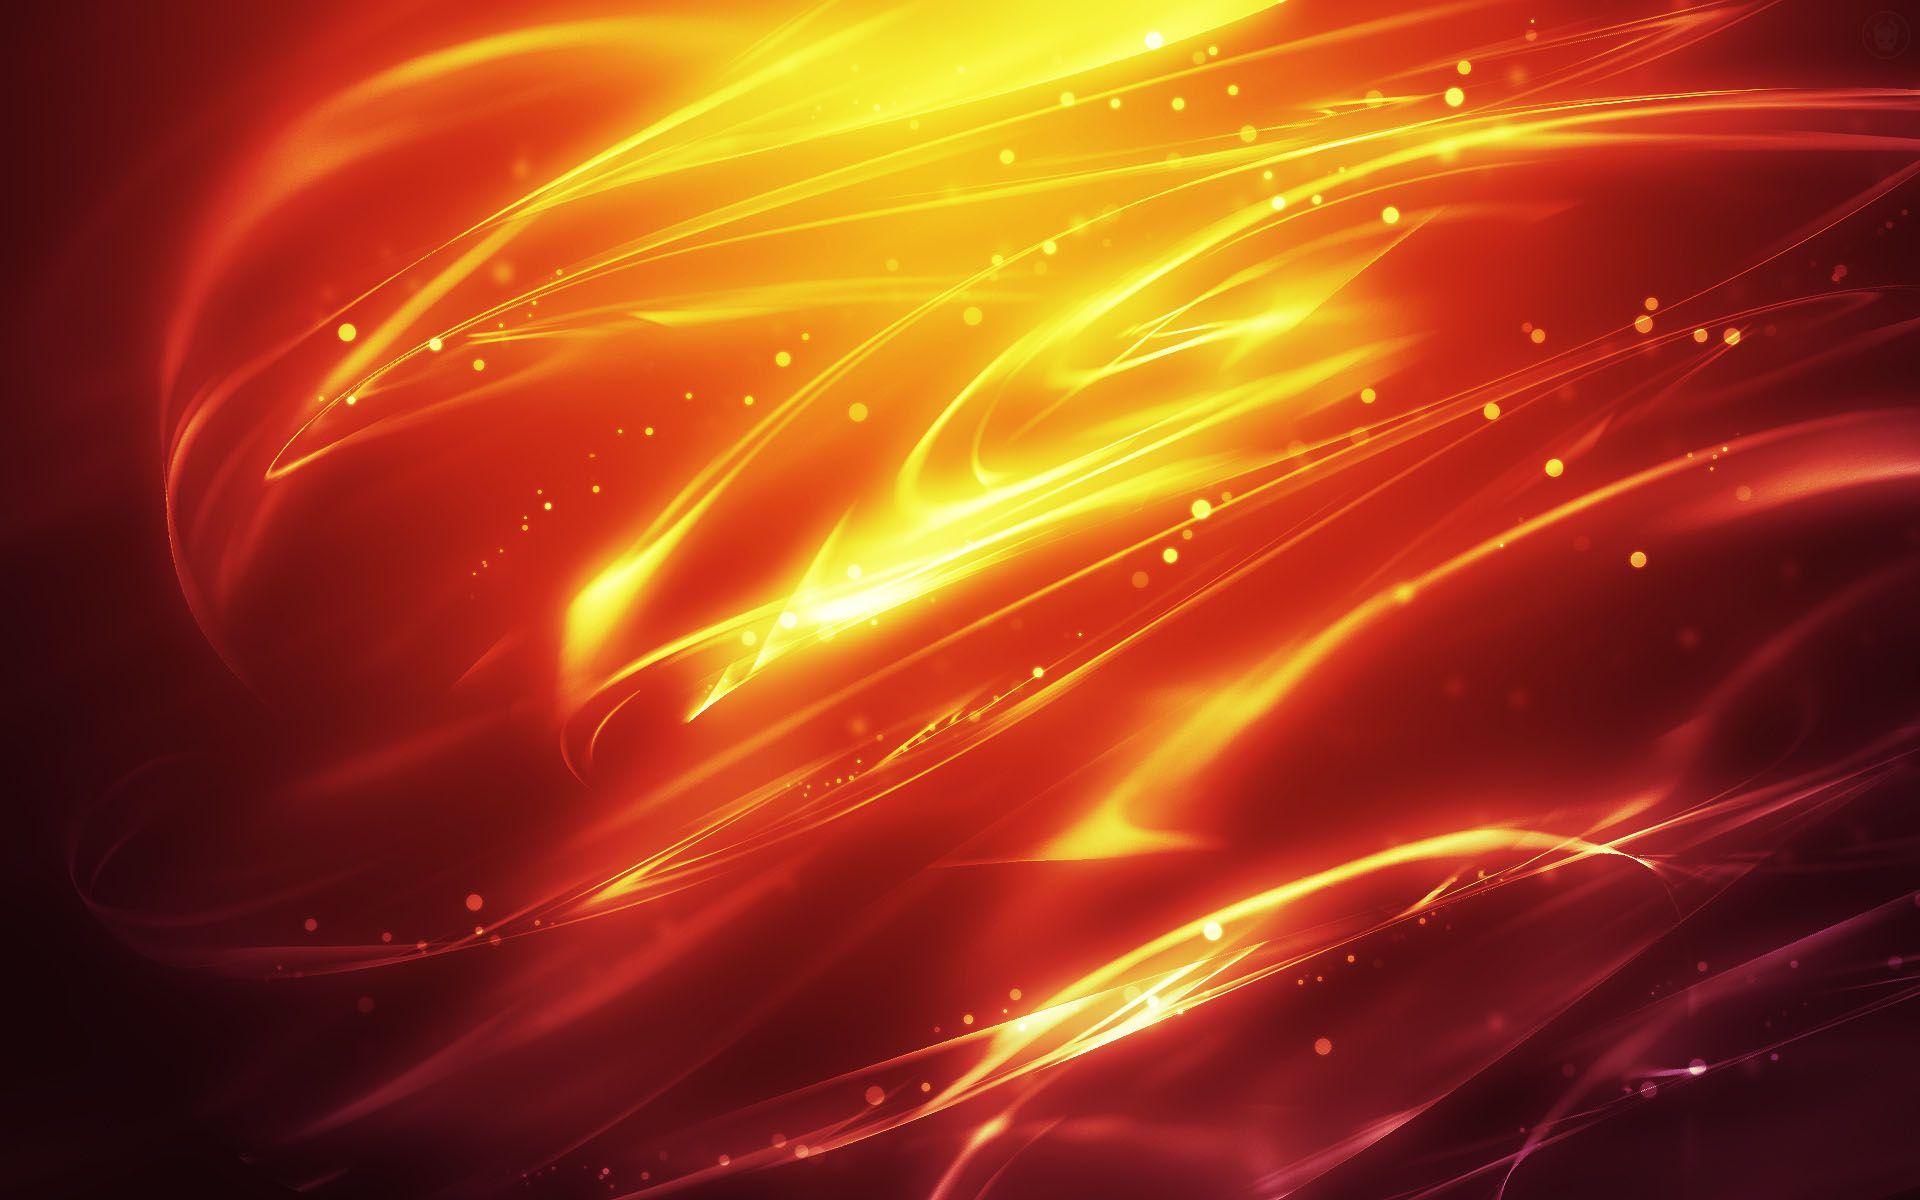 Best Fire Abstract Wallpaper in High Quality, Shin Quinones